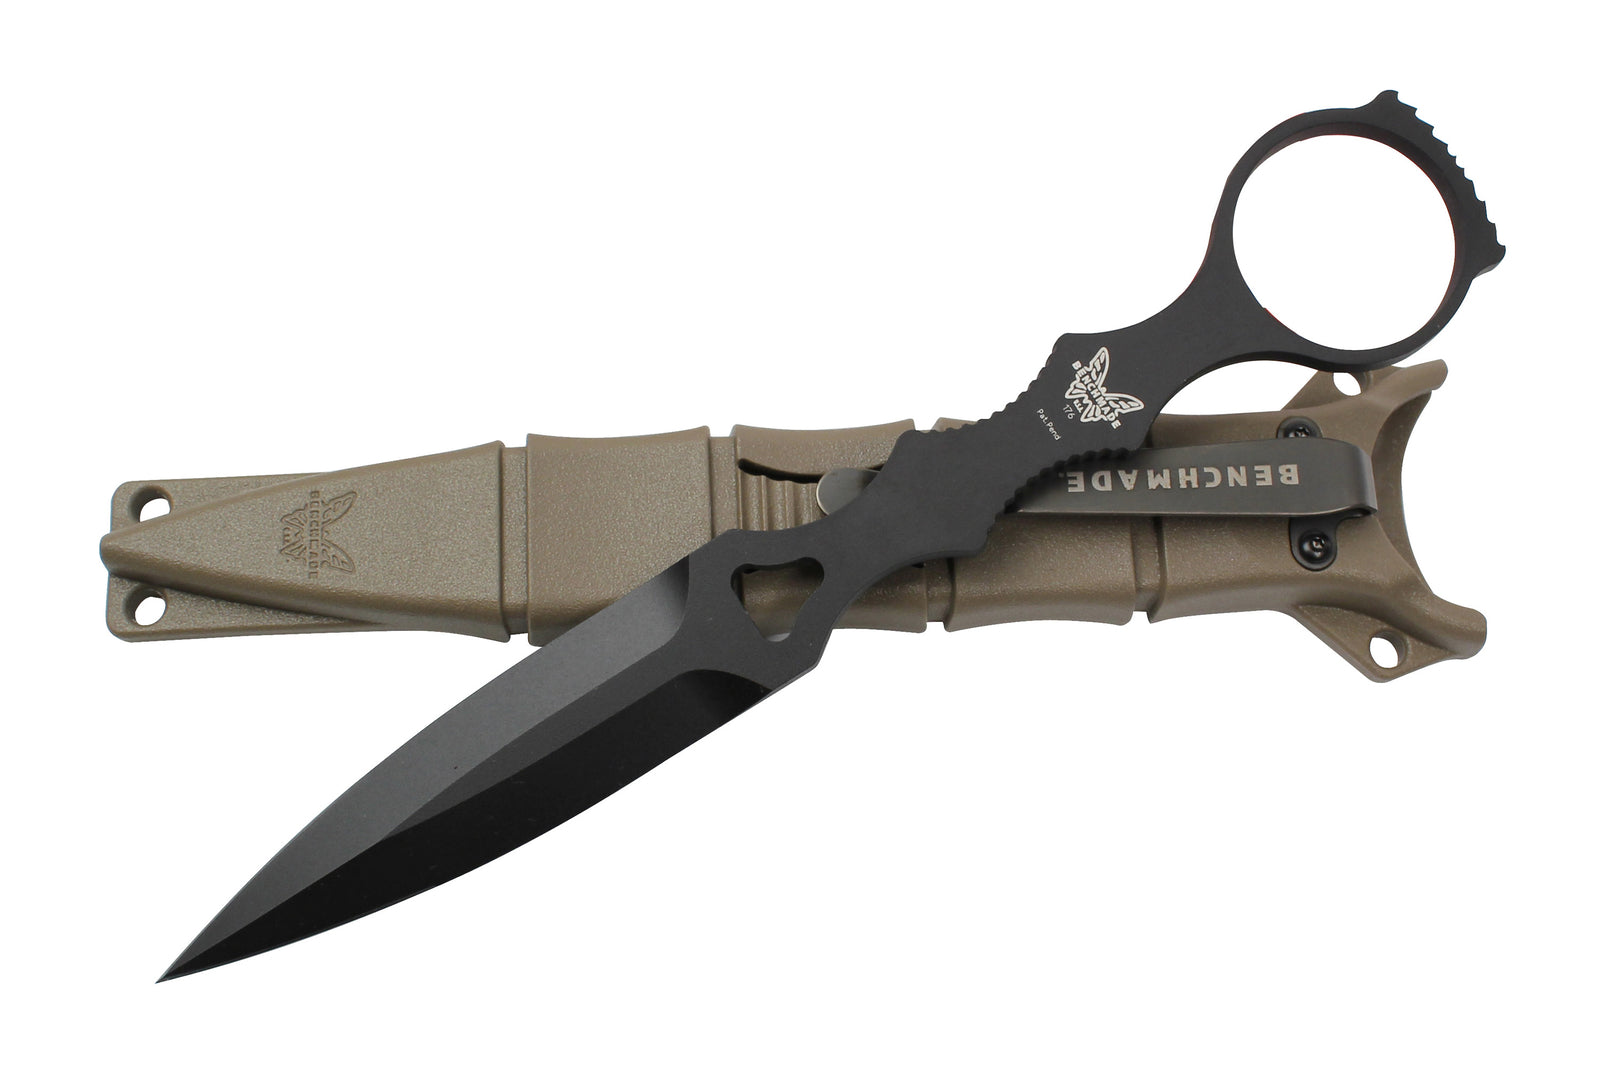 Benchmade 176BKSN Thompson SOCP (Special Operatives Combatives Programs) - Fixed Blade with Sand Sheath - Wander Outdoors